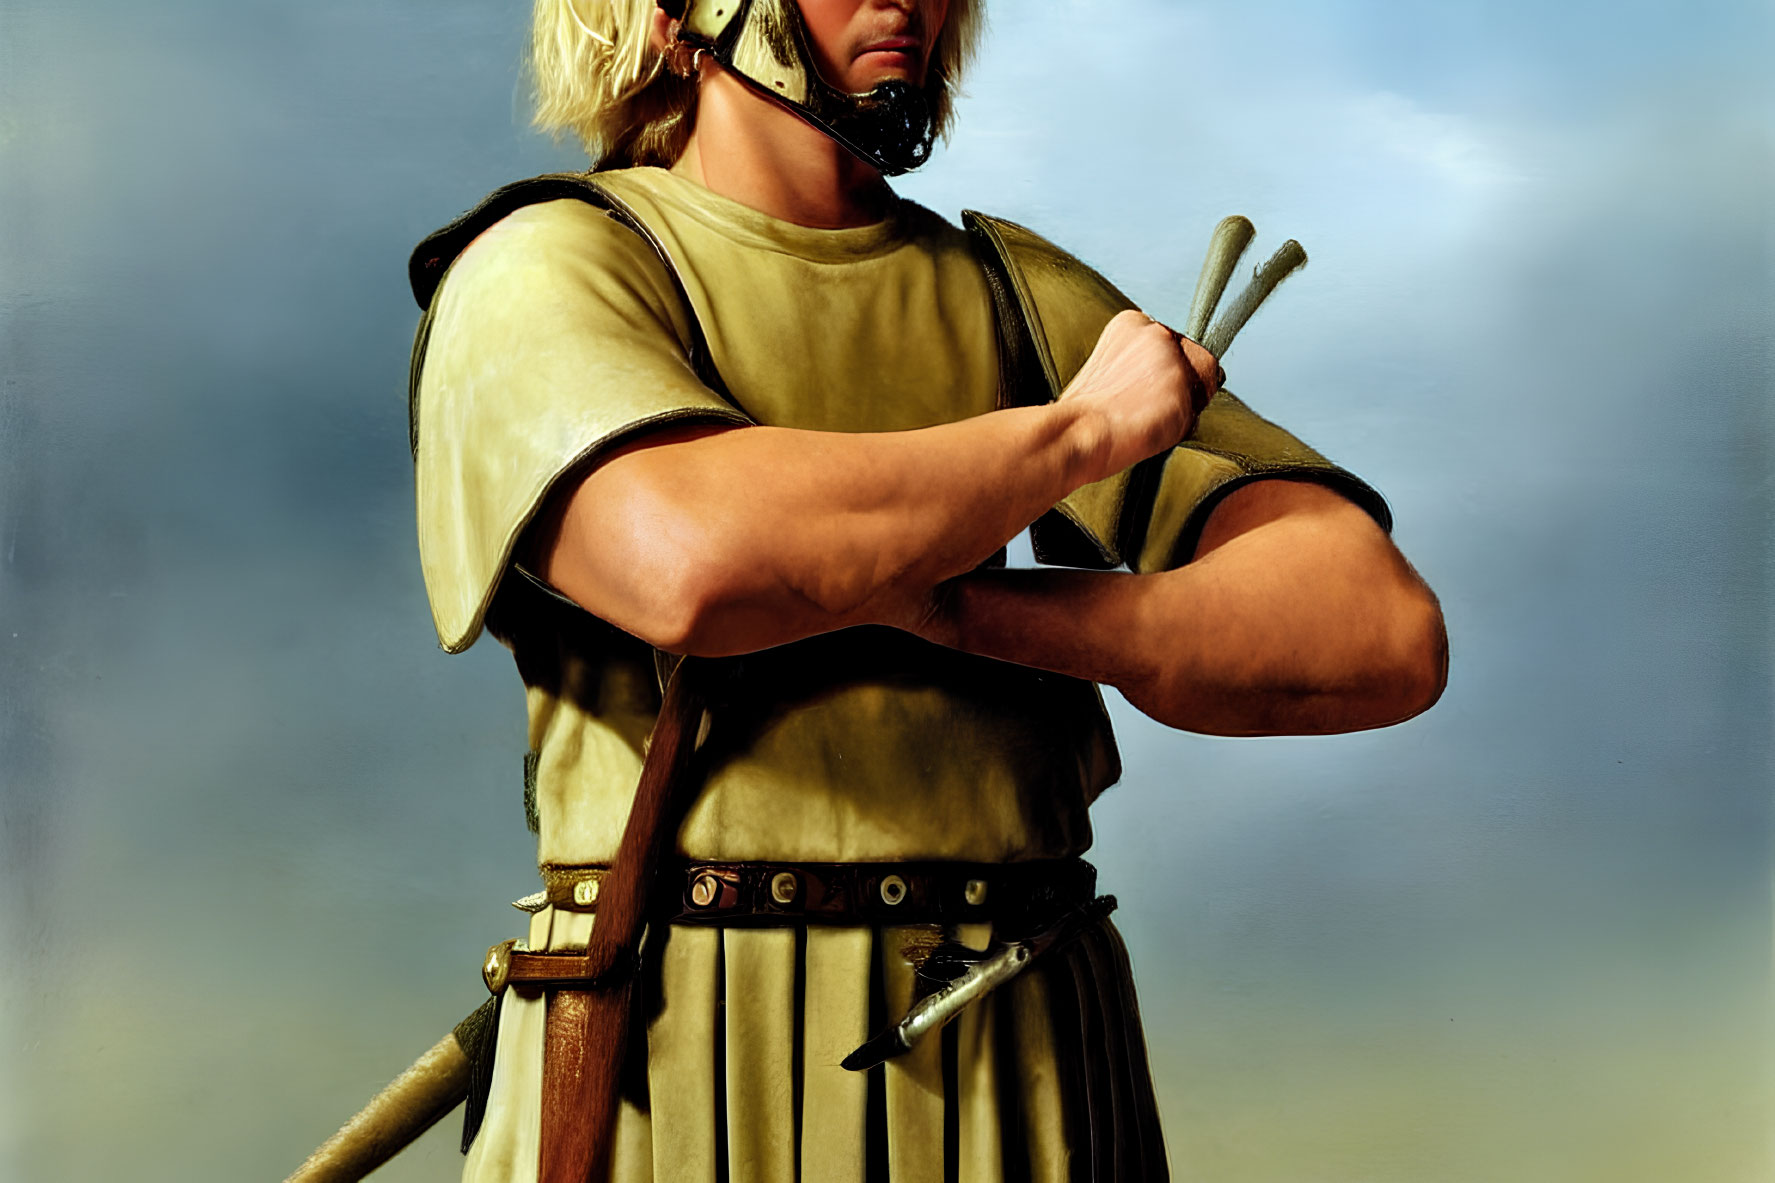 Muscular blond warrior in tunic grips sword hilt confidently against cloudy sky.